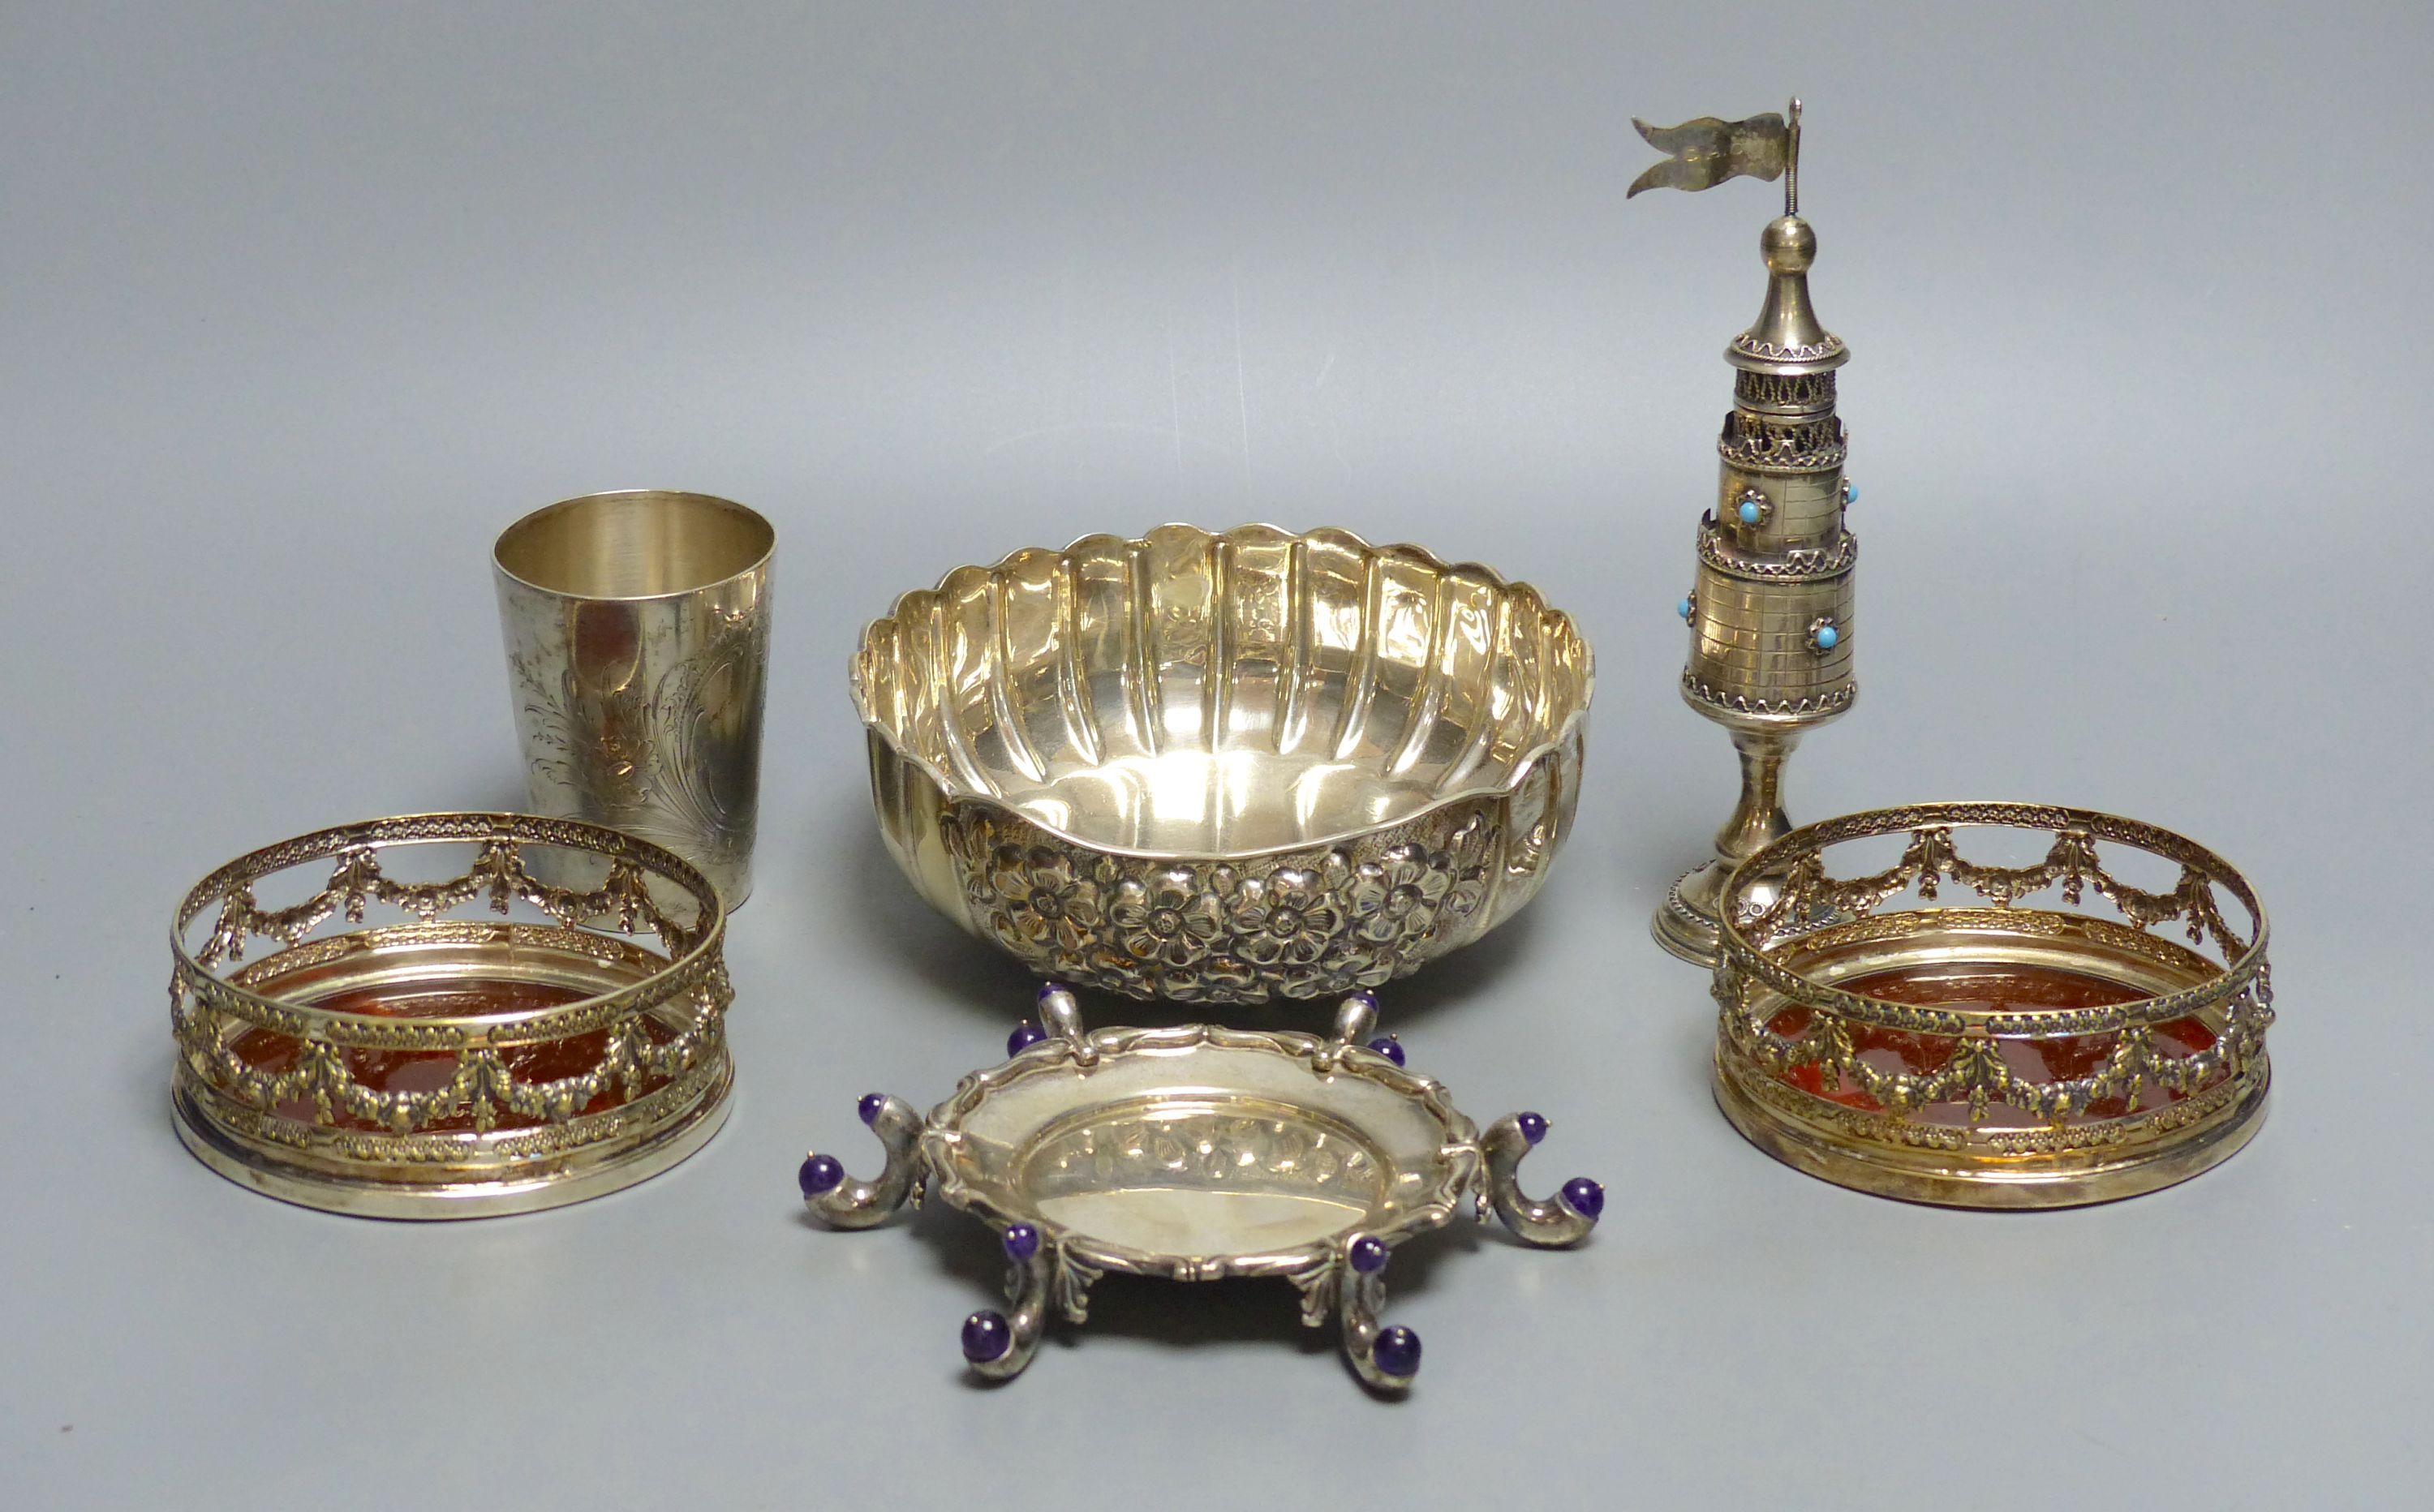 A sterling bowl, 15.1cm, a white metal and enamel spice tower, German beaker, pair of plated coasters and a stand